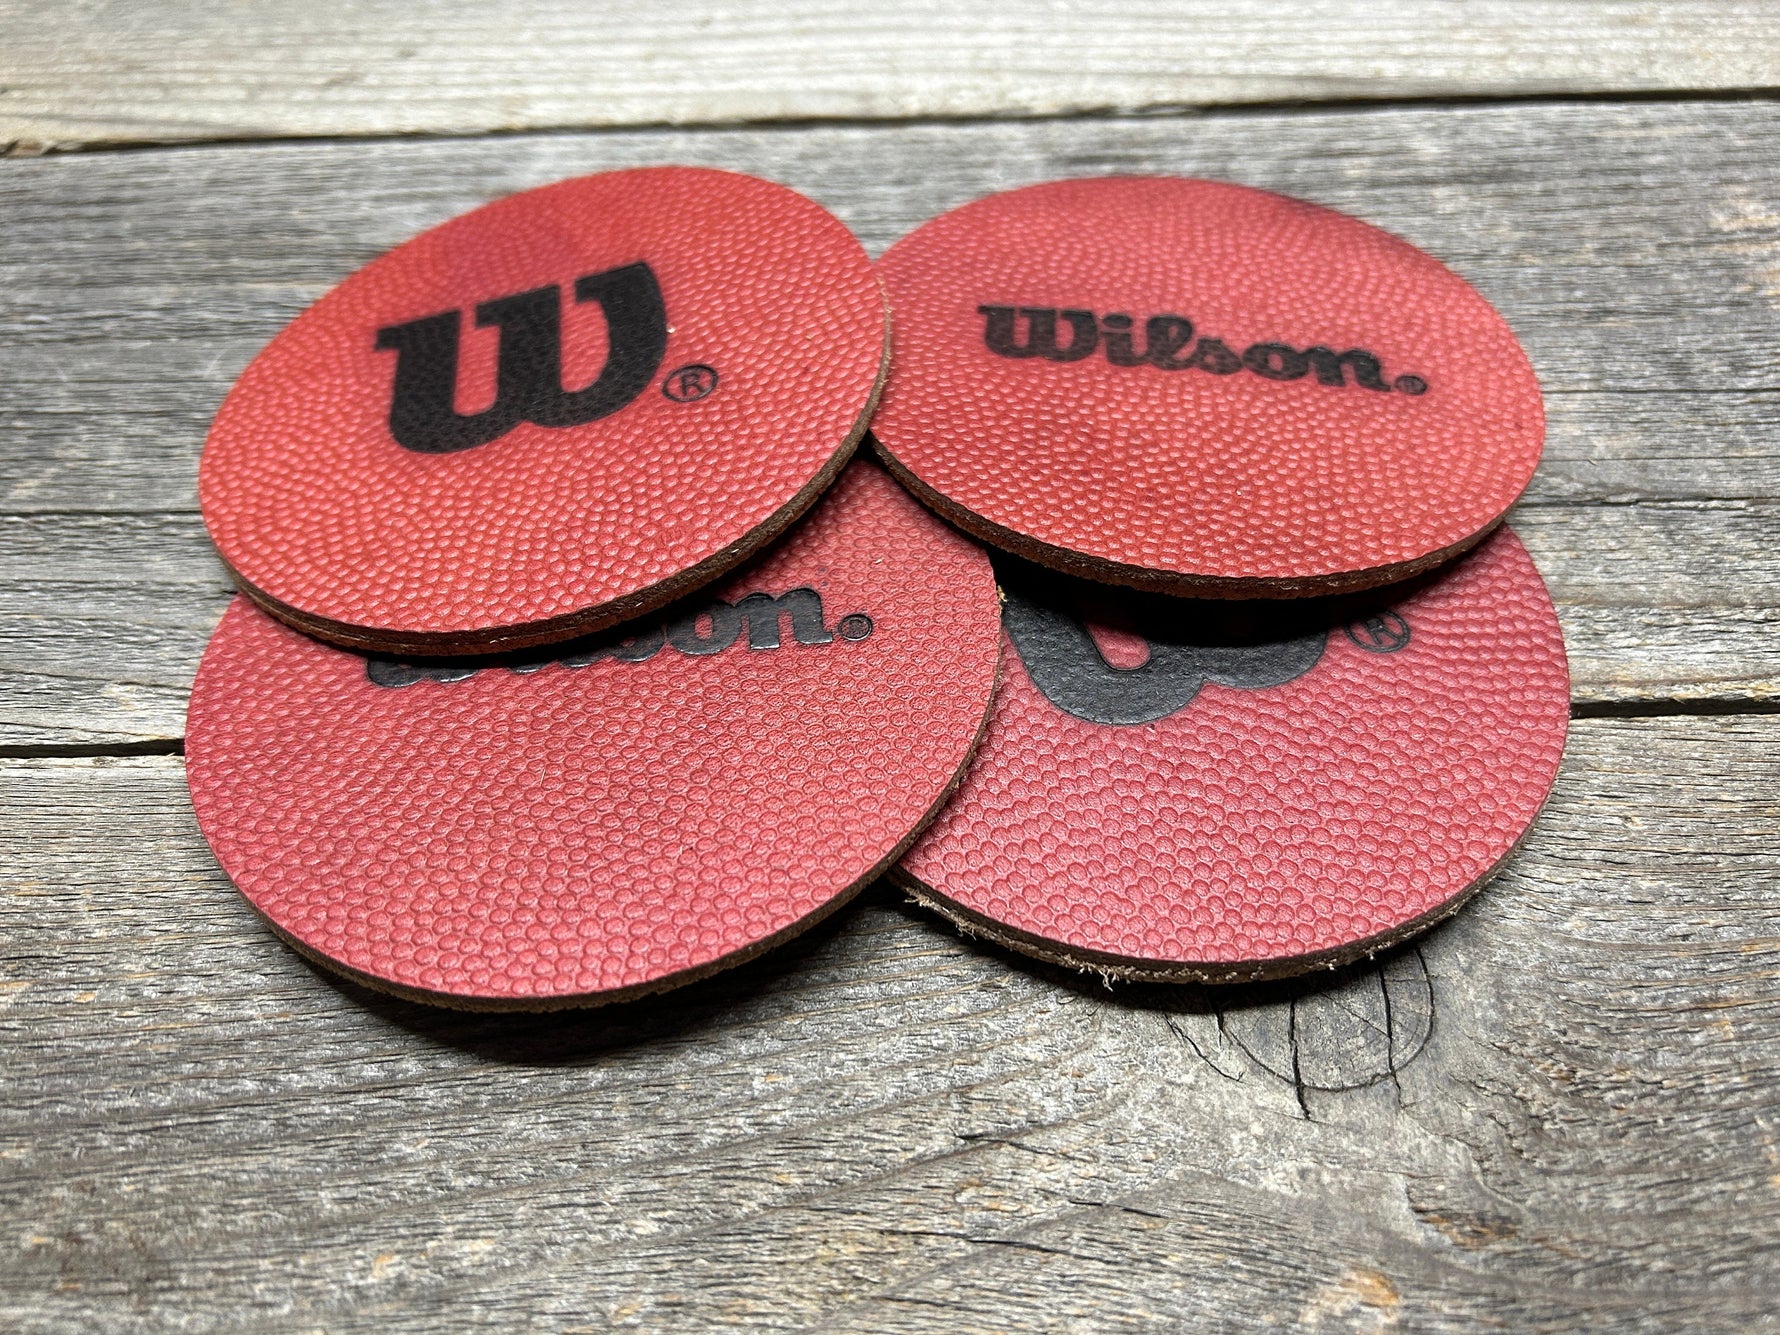 Set of 4 Coasters - WILSON/Horween NFL Leather - Official NFL Football Leather!!